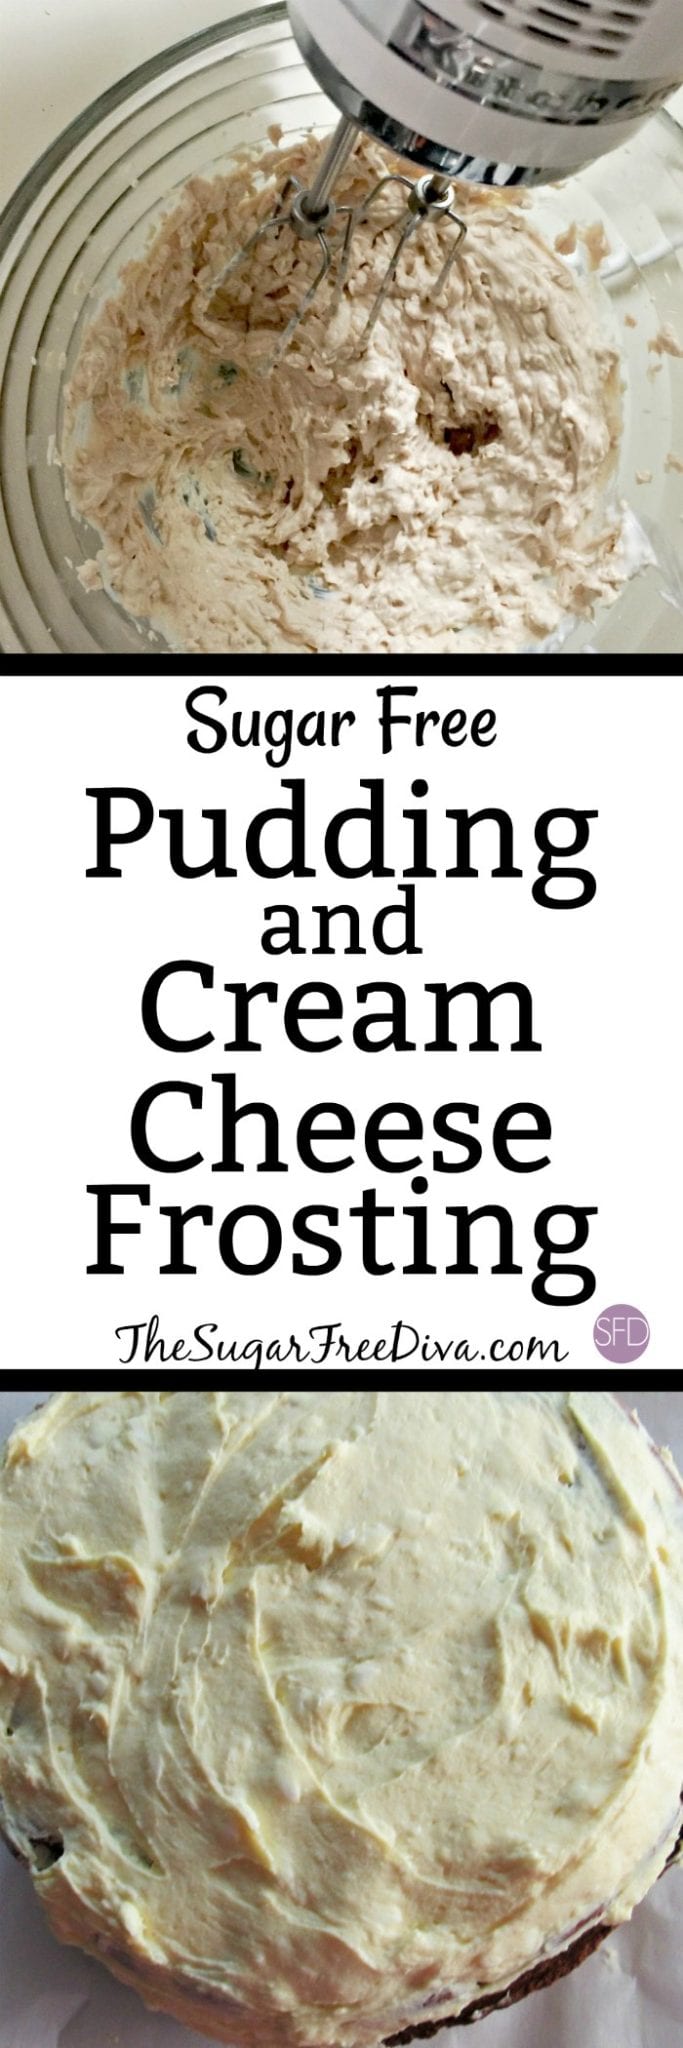 Sugar Free Pudding and Cream Cheese Frosting